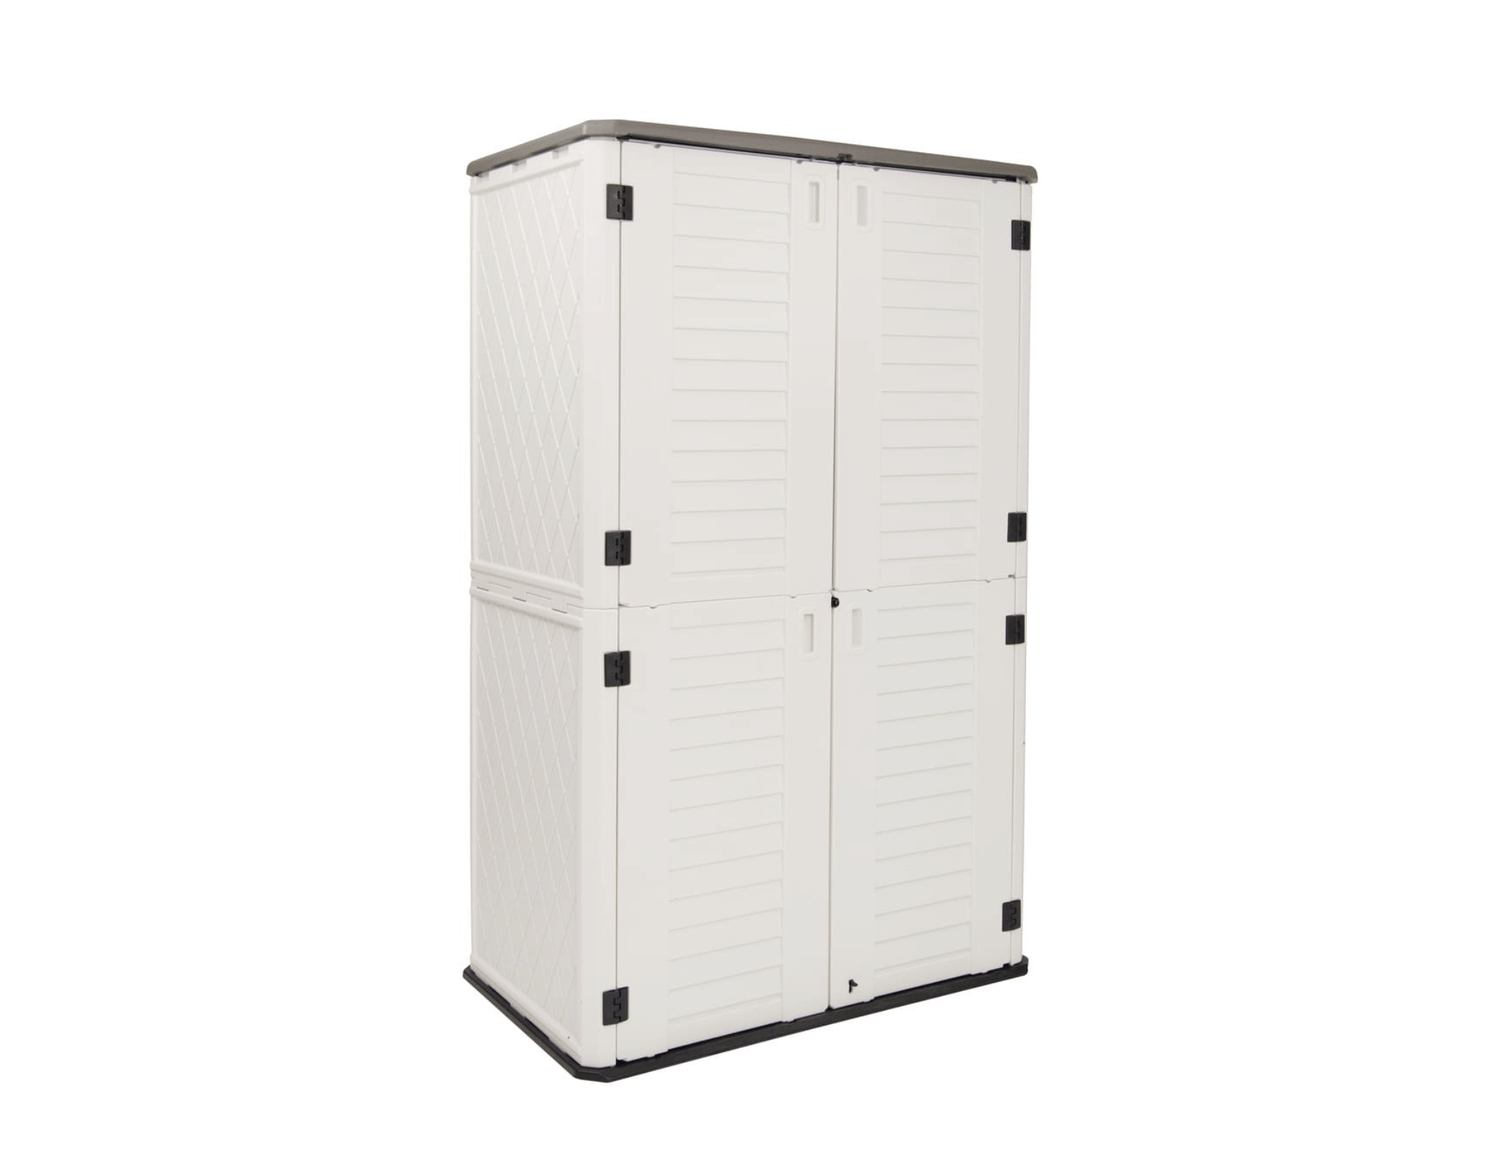 Horti Cubic 66 cu. ft. Outdoor Vertical Storage Shed - Horti Cubic